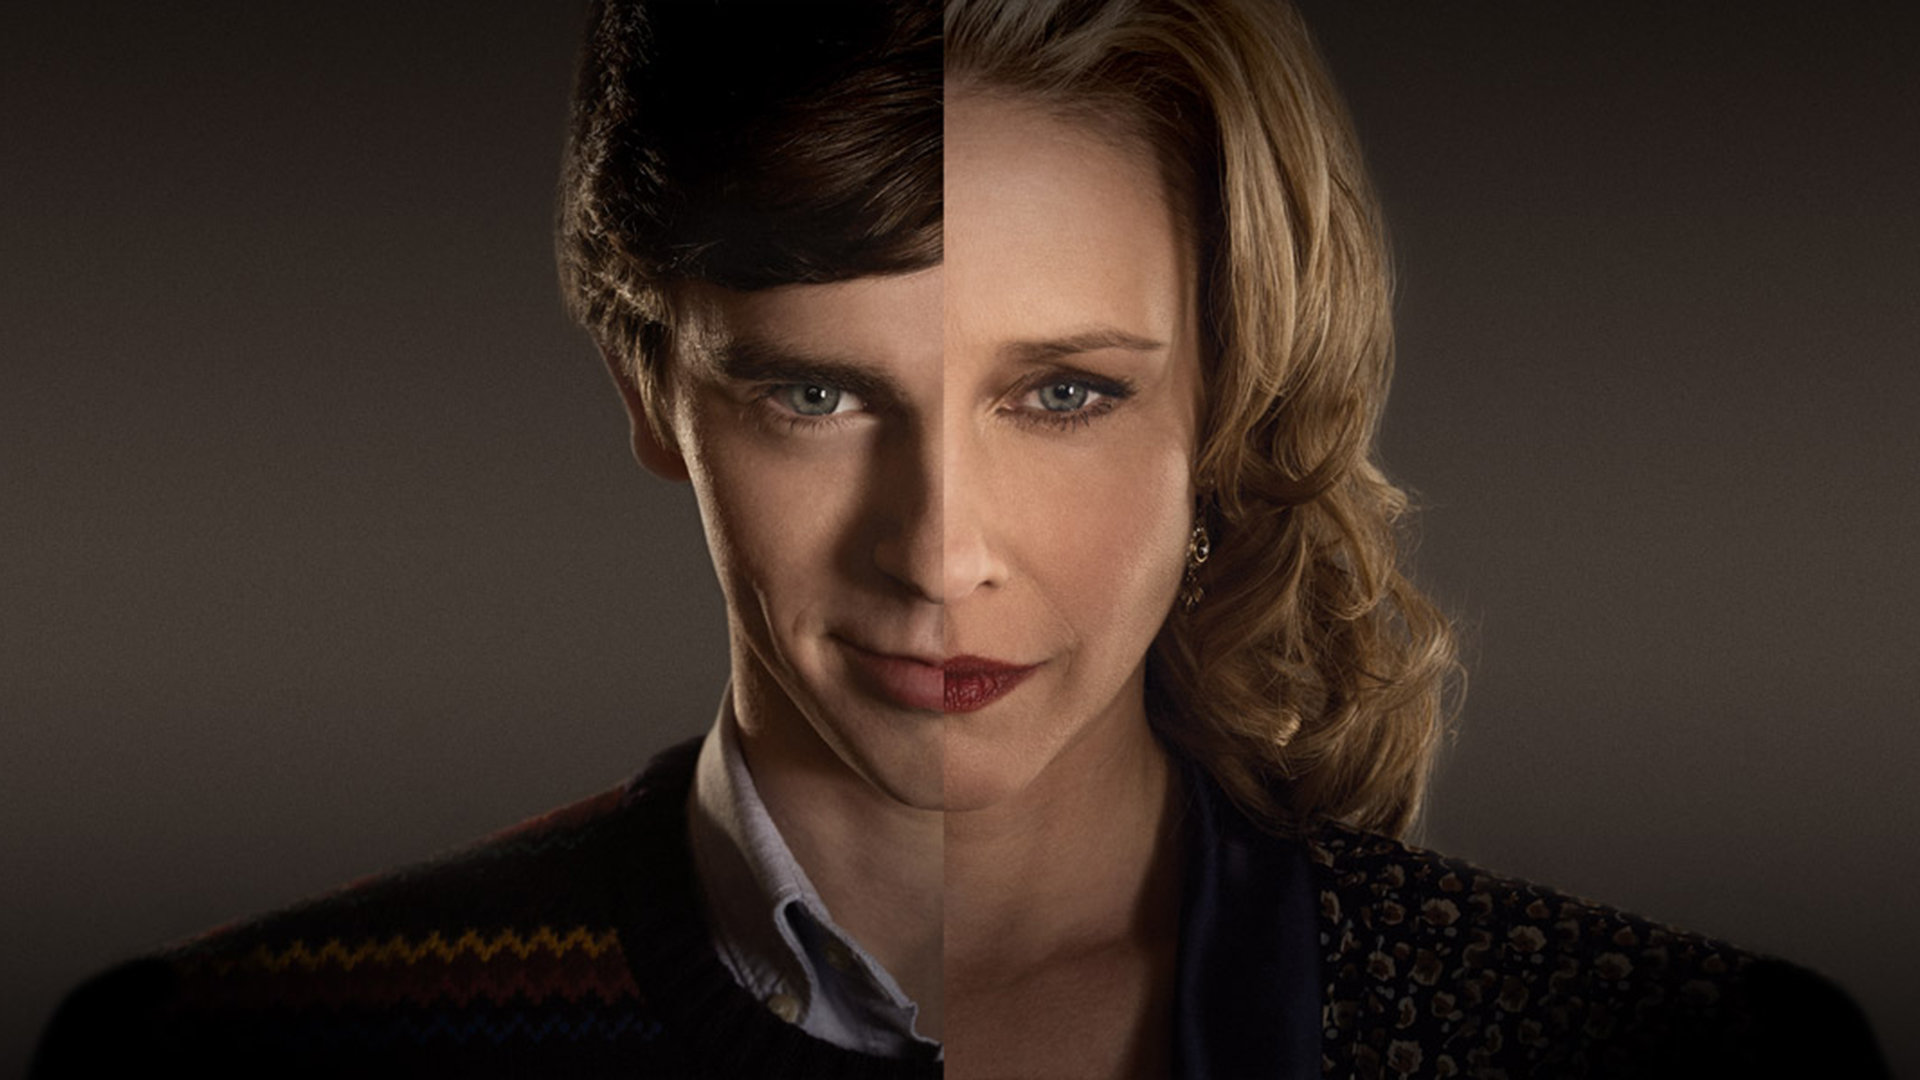 Best Bates Motel wallpaper ID:193227 for High Resolution full hd 1080p computer